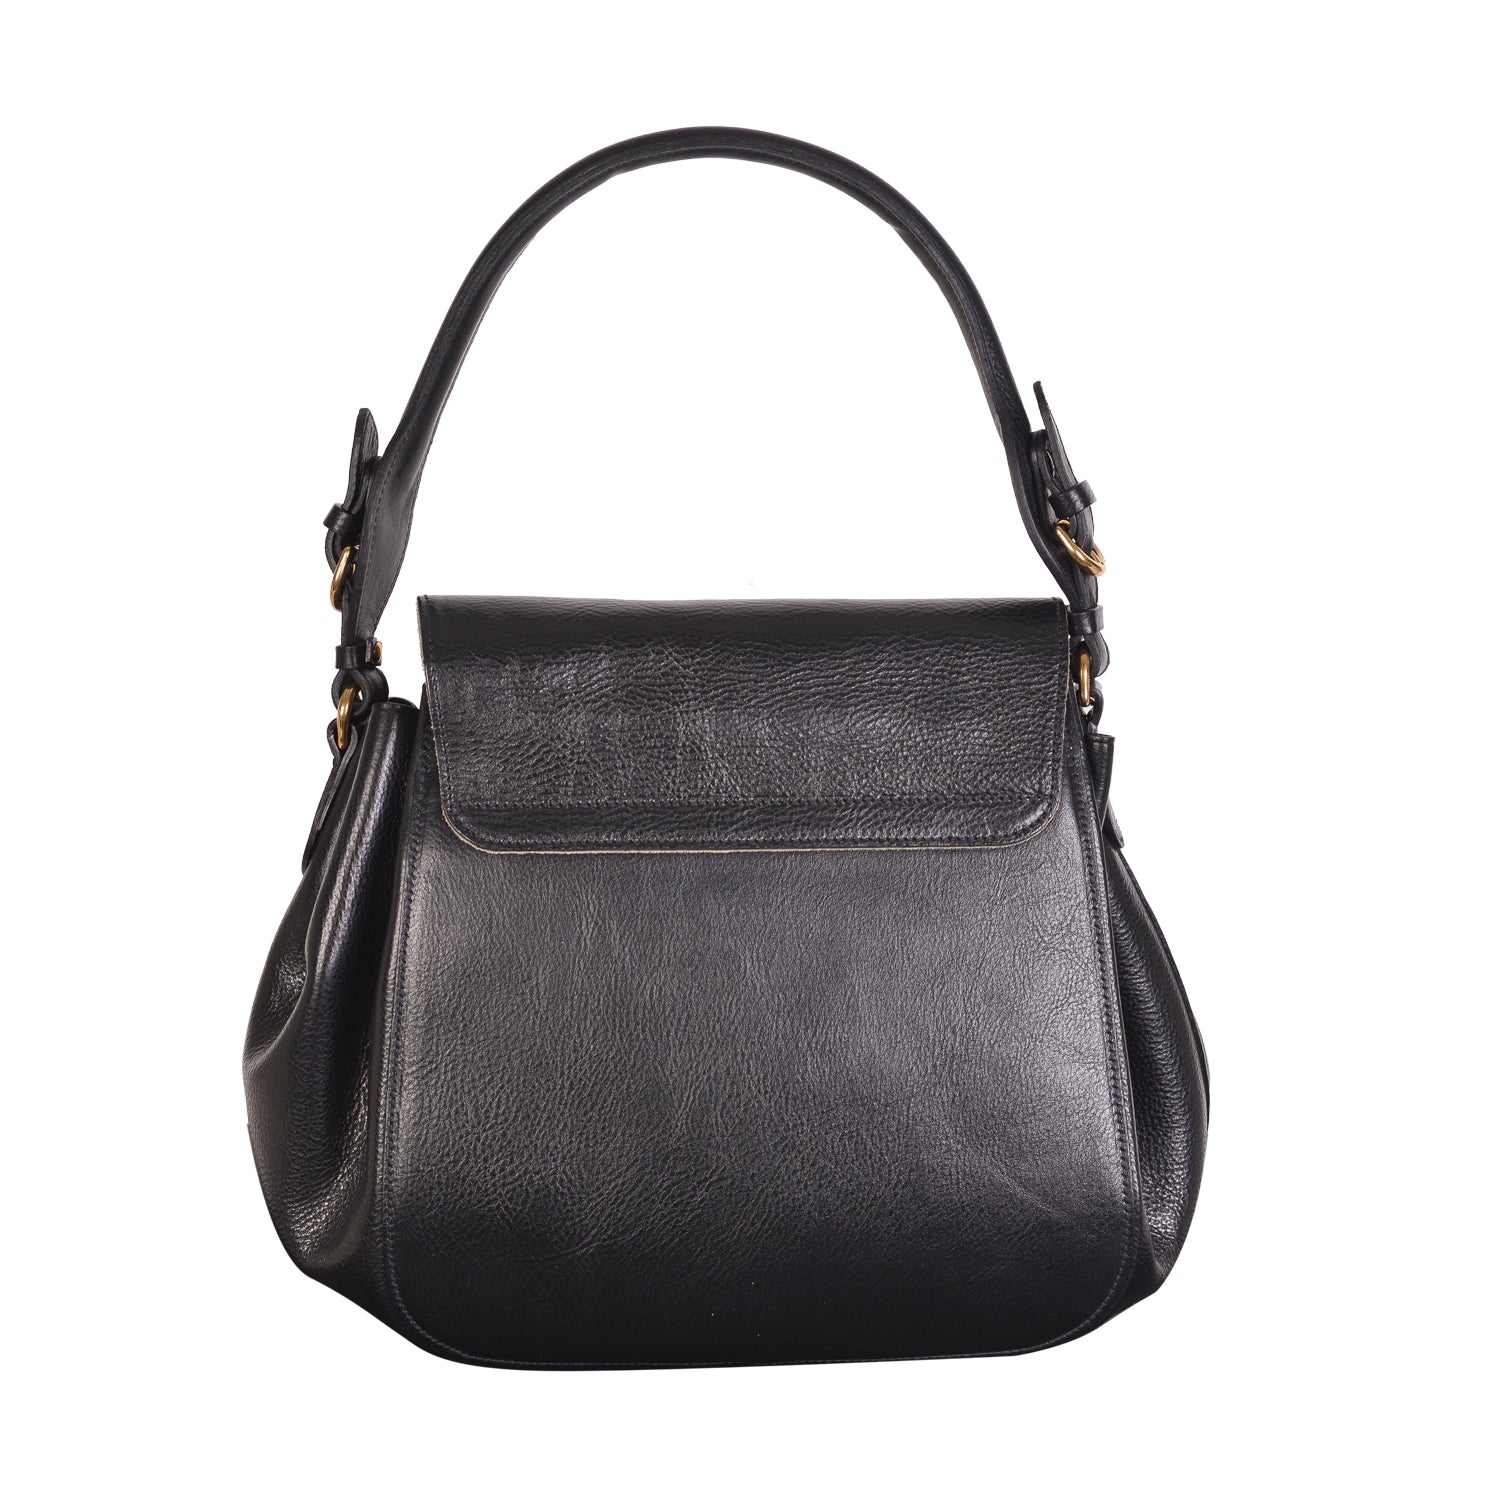 NEW IL BISONTE WOMEN'S CURLY COLLECTION SHOULDER BAG IN BLACK LEATHER